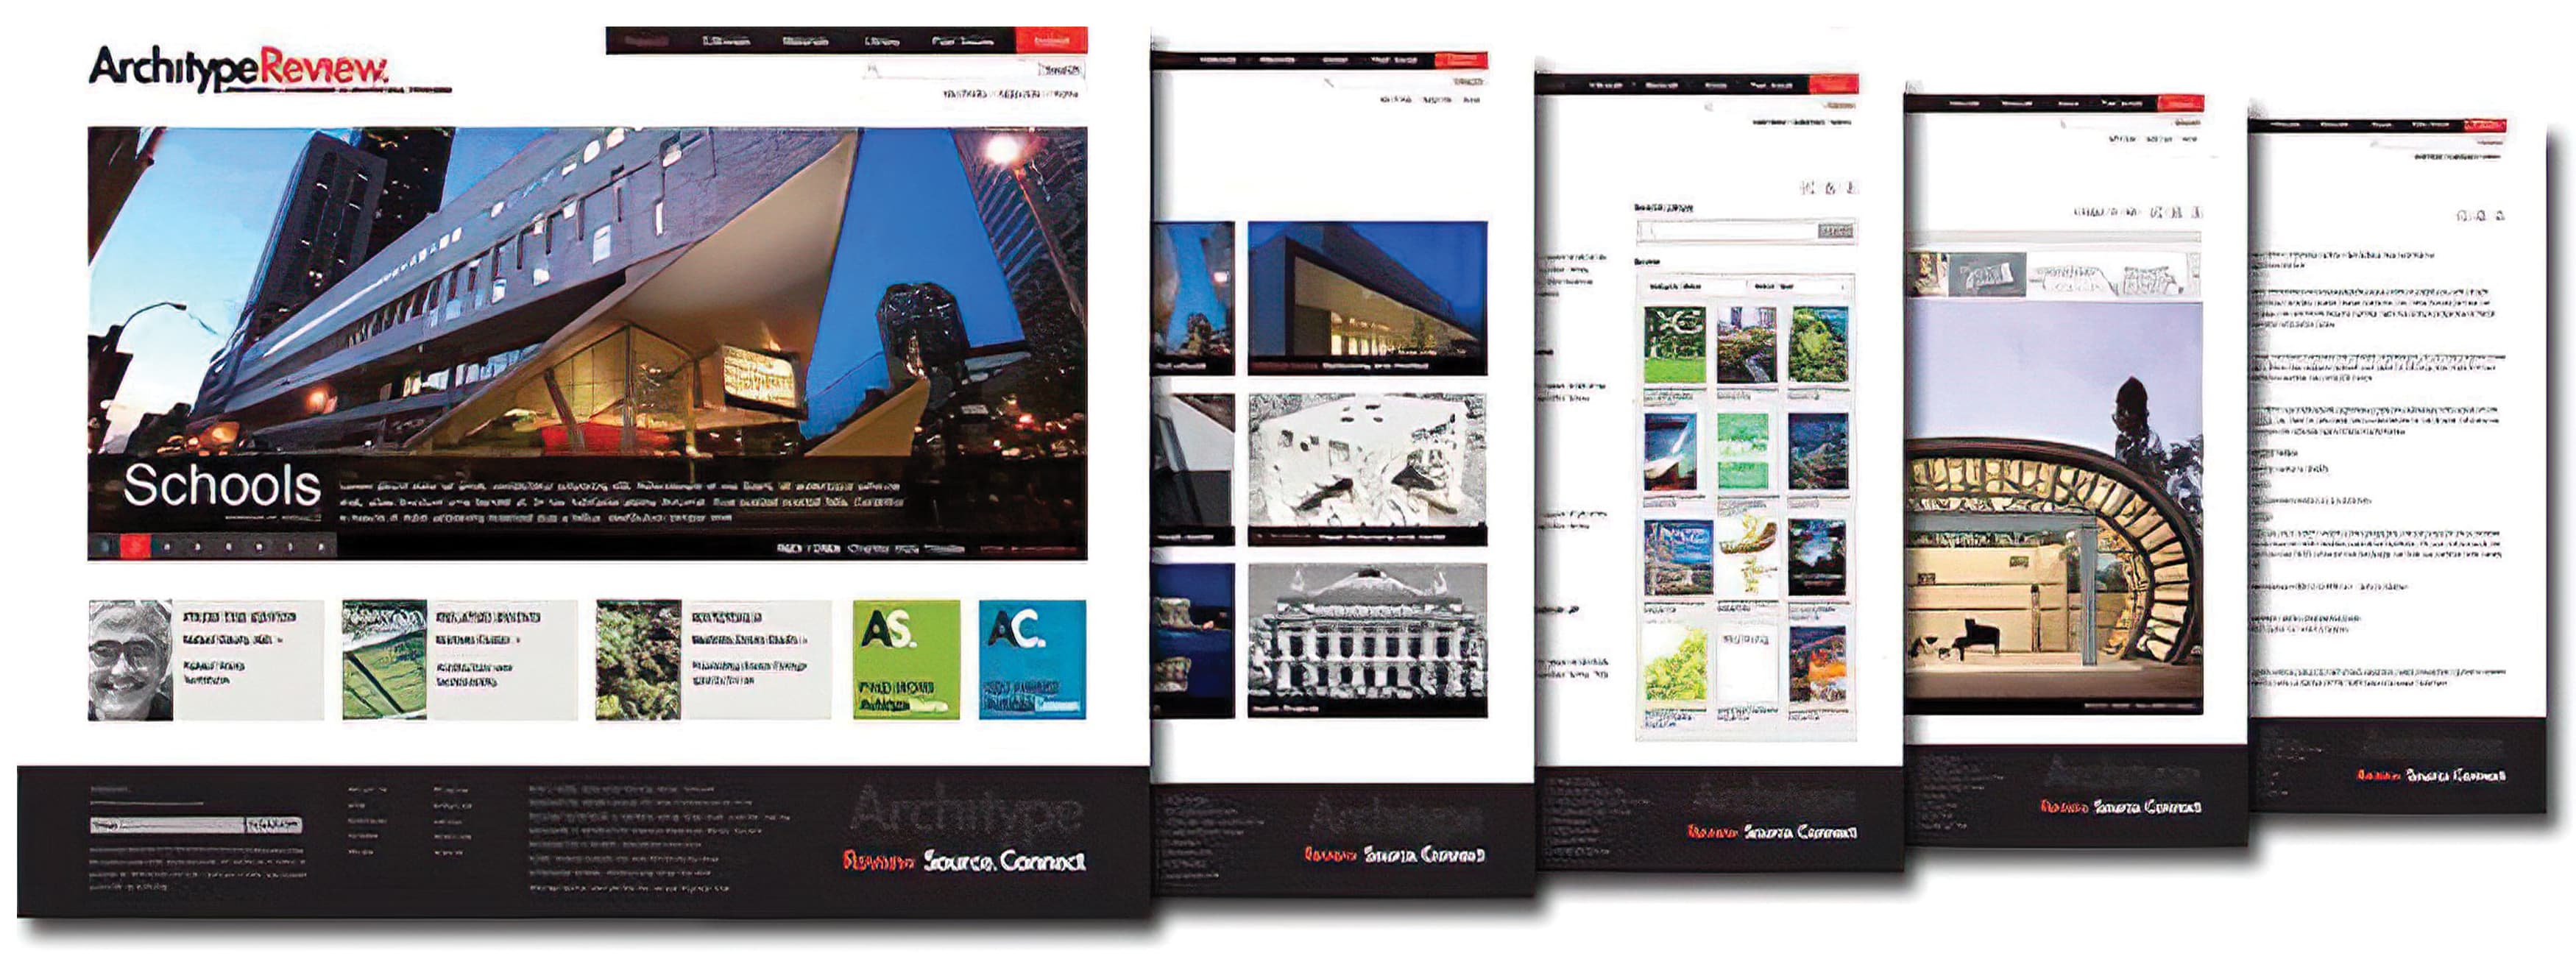 A series of windows from the new website designed for Architype Review.